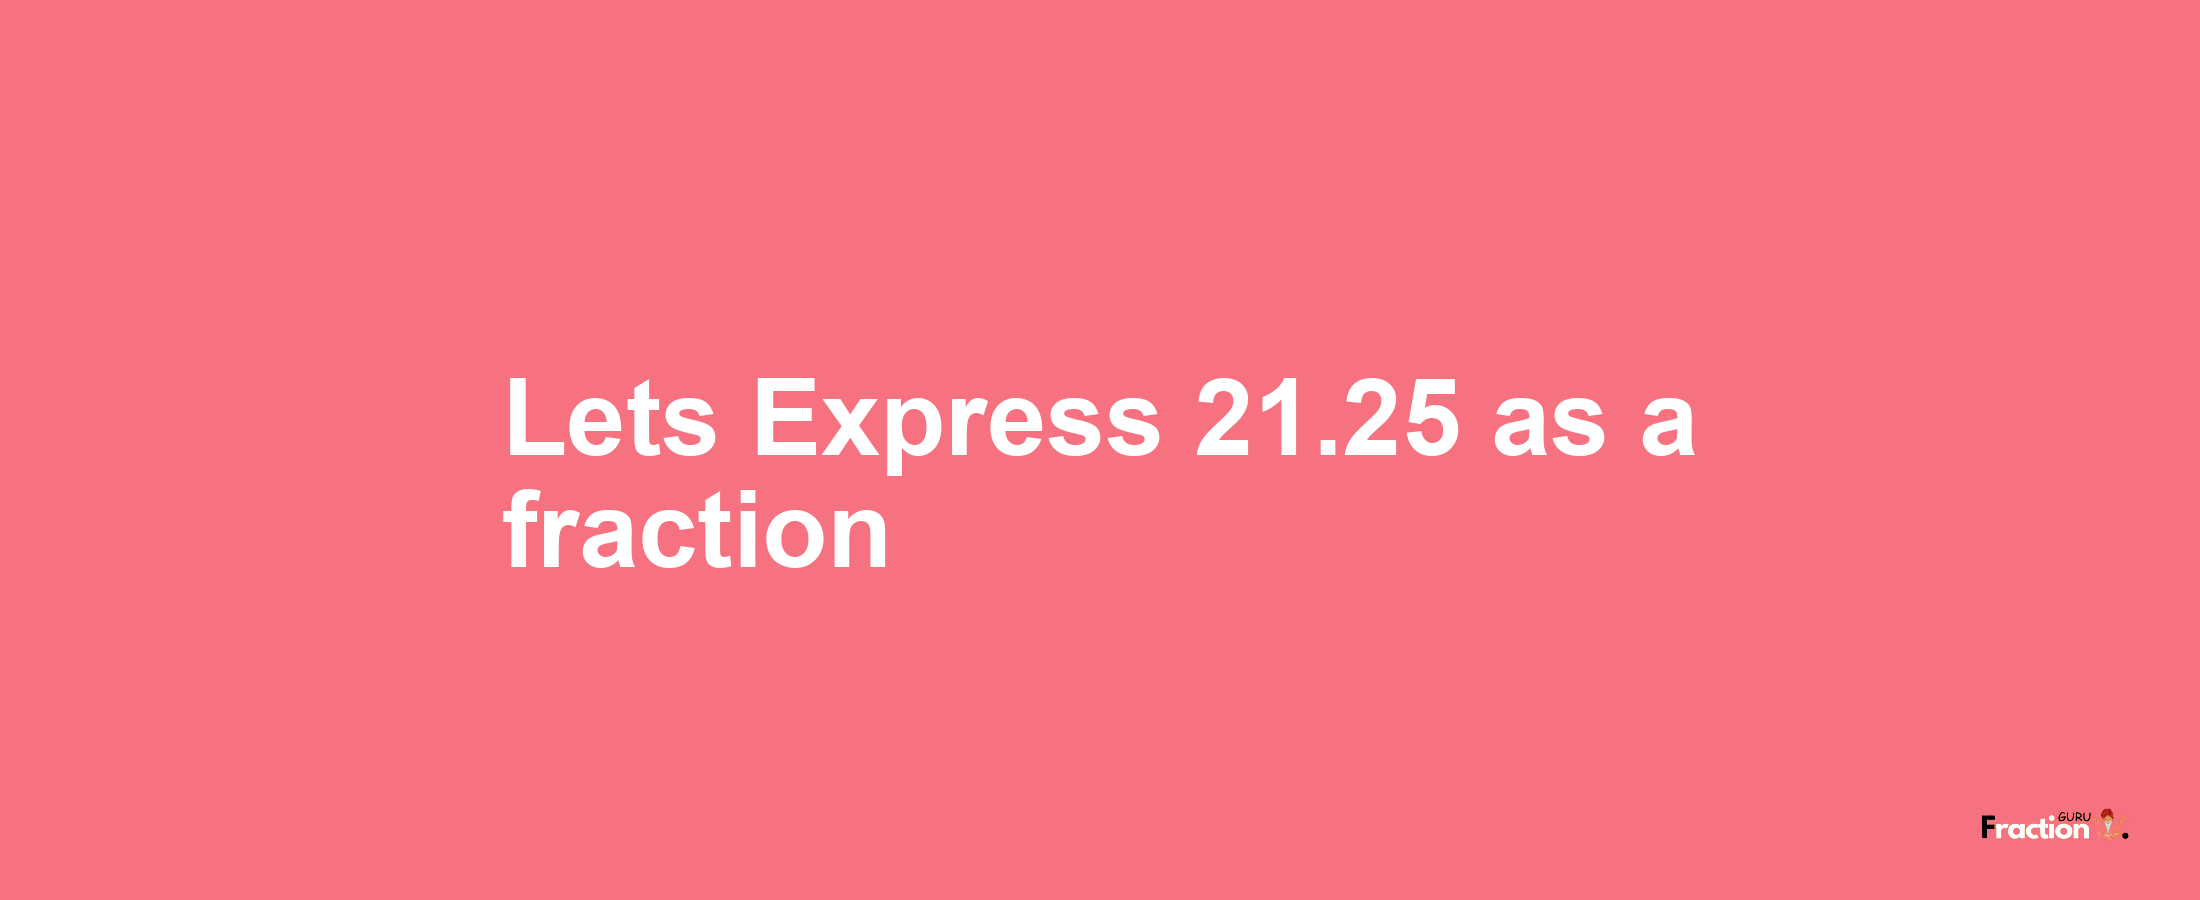 Lets Express 21.25 as afraction